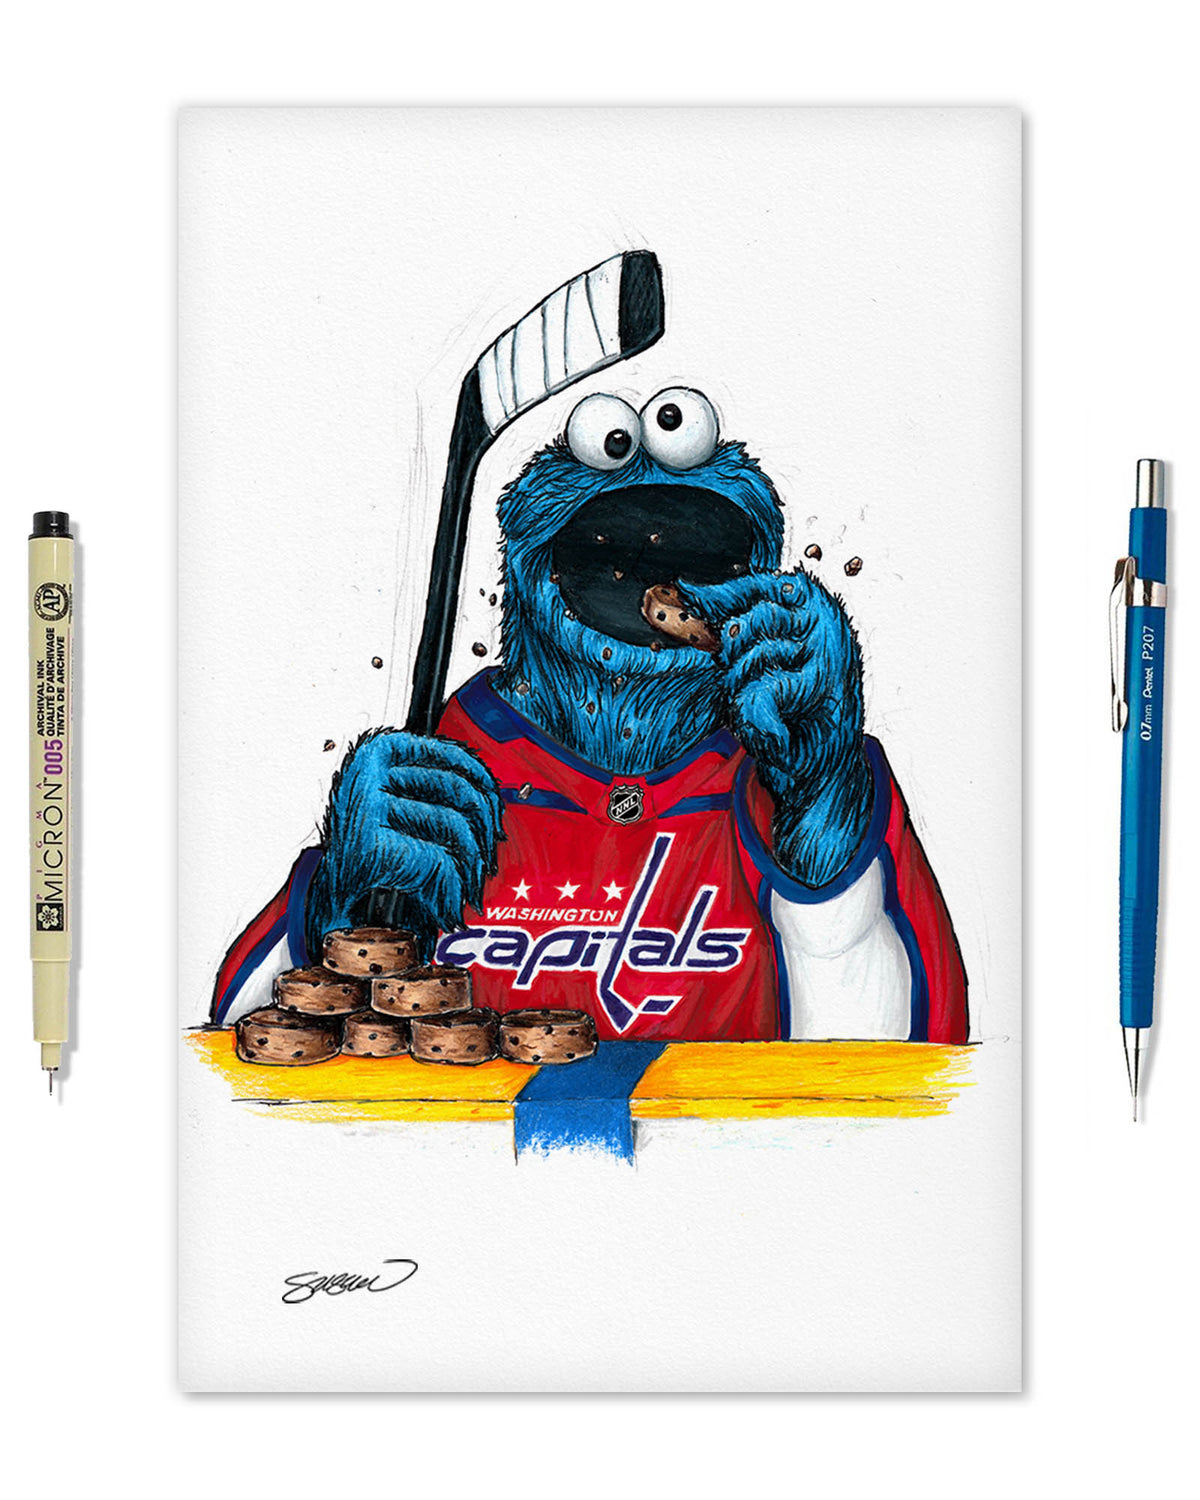 Cookie Monster x NHL Capitals Limited Edition Fine Art Print